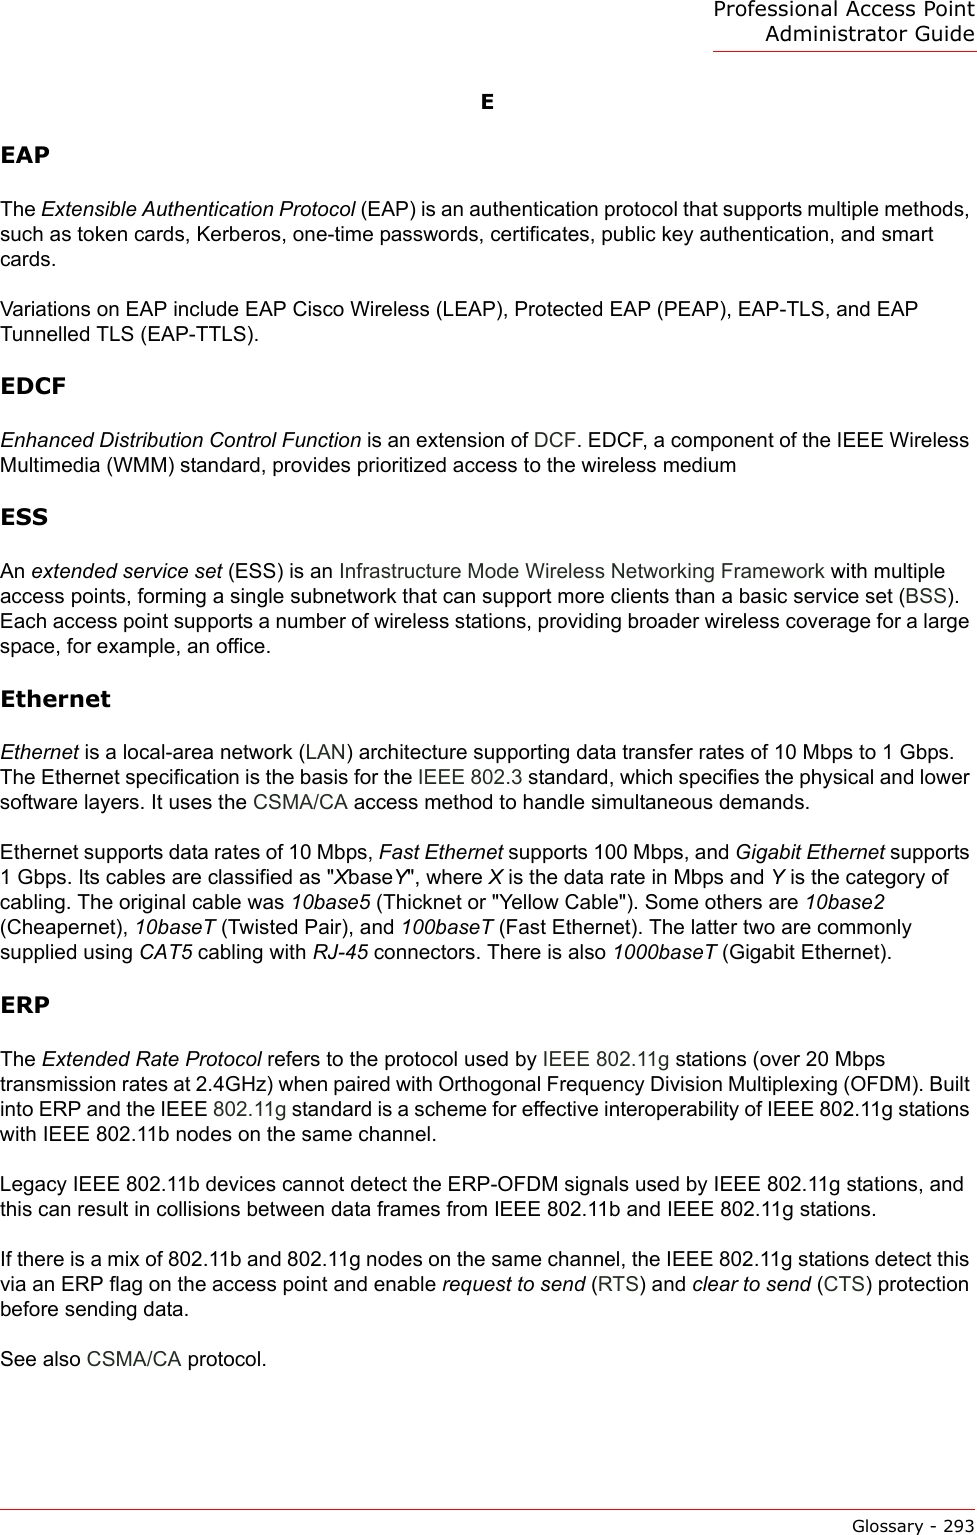 Professional Access Point Administrator GuideGlossary - 293EEAPThe Extensible Authentication Protocol (EAP) is an authentication protocol that supports multiple methods, such as token cards, Kerberos, one-time passwords, certificates, public key authentication, and smart cards. Variations on EAP include EAP Cisco Wireless (LEAP), Protected EAP (PEAP), EAP-TLS, and EAP Tunnelled TLS (EAP-TTLS).EDCFEnhanced Distribution Control Function is an extension of DCF. EDCF, a component of the IEEE Wireless Multimedia (WMM) standard, provides prioritized access to the wireless mediumESSAn extended service set (ESS) is an Infrastructure Mode Wireless Networking Framework with multiple access points, forming a single subnetwork that can support more clients than a basic service set (BSS). Each access point supports a number of wireless stations, providing broader wireless coverage for a large space, for example, an office.EthernetEthernet is a local-area network (LAN) architecture supporting data transfer rates of 10 Mbps to 1 Gbps. The Ethernet specification is the basis for the IEEE 802.3 standard, which specifies the physical and lower software layers. It uses the CSMA/CA access method to handle simultaneous demands. Ethernet supports data rates of 10 Mbps, Fast Ethernet supports 100 Mbps, and Gigabit Ethernet supports 1 Gbps. Its cables are classified as &quot;XbaseY&quot;, where X is the data rate in Mbps and Y is the category of cabling. The original cable was 10base5 (Thicknet or &quot;Yellow Cable&quot;). Some others are 10base2 (Cheapernet), 10baseT (Twisted Pair), and 100baseT (Fast Ethernet). The latter two are commonly supplied using CAT5 cabling with RJ-45 connectors. There is also 1000baseT (Gigabit Ethernet).ERPThe Extended Rate Protocol refers to the protocol used by IEEE 802.11g stations (over 20 Mbps transmission rates at 2.4GHz) when paired with Orthogonal Frequency Division Multiplexing (OFDM). Built into ERP and the IEEE 802.11g standard is a scheme for effective interoperability of IEEE 802.11g stations with IEEE 802.11b nodes on the same channel.Legacy IEEE 802.11b devices cannot detect the ERP-OFDM signals used by IEEE 802.11g stations, and this can result in collisions between data frames from IEEE 802.11b and IEEE 802.11g stations.If there is a mix of 802.11b and 802.11g nodes on the same channel, the IEEE 802.11g stations detect this via an ERP flag on the access point and enable request to send (RTS) and clear to send (CTS) protection before sending data.See also CSMA/CA protocol.